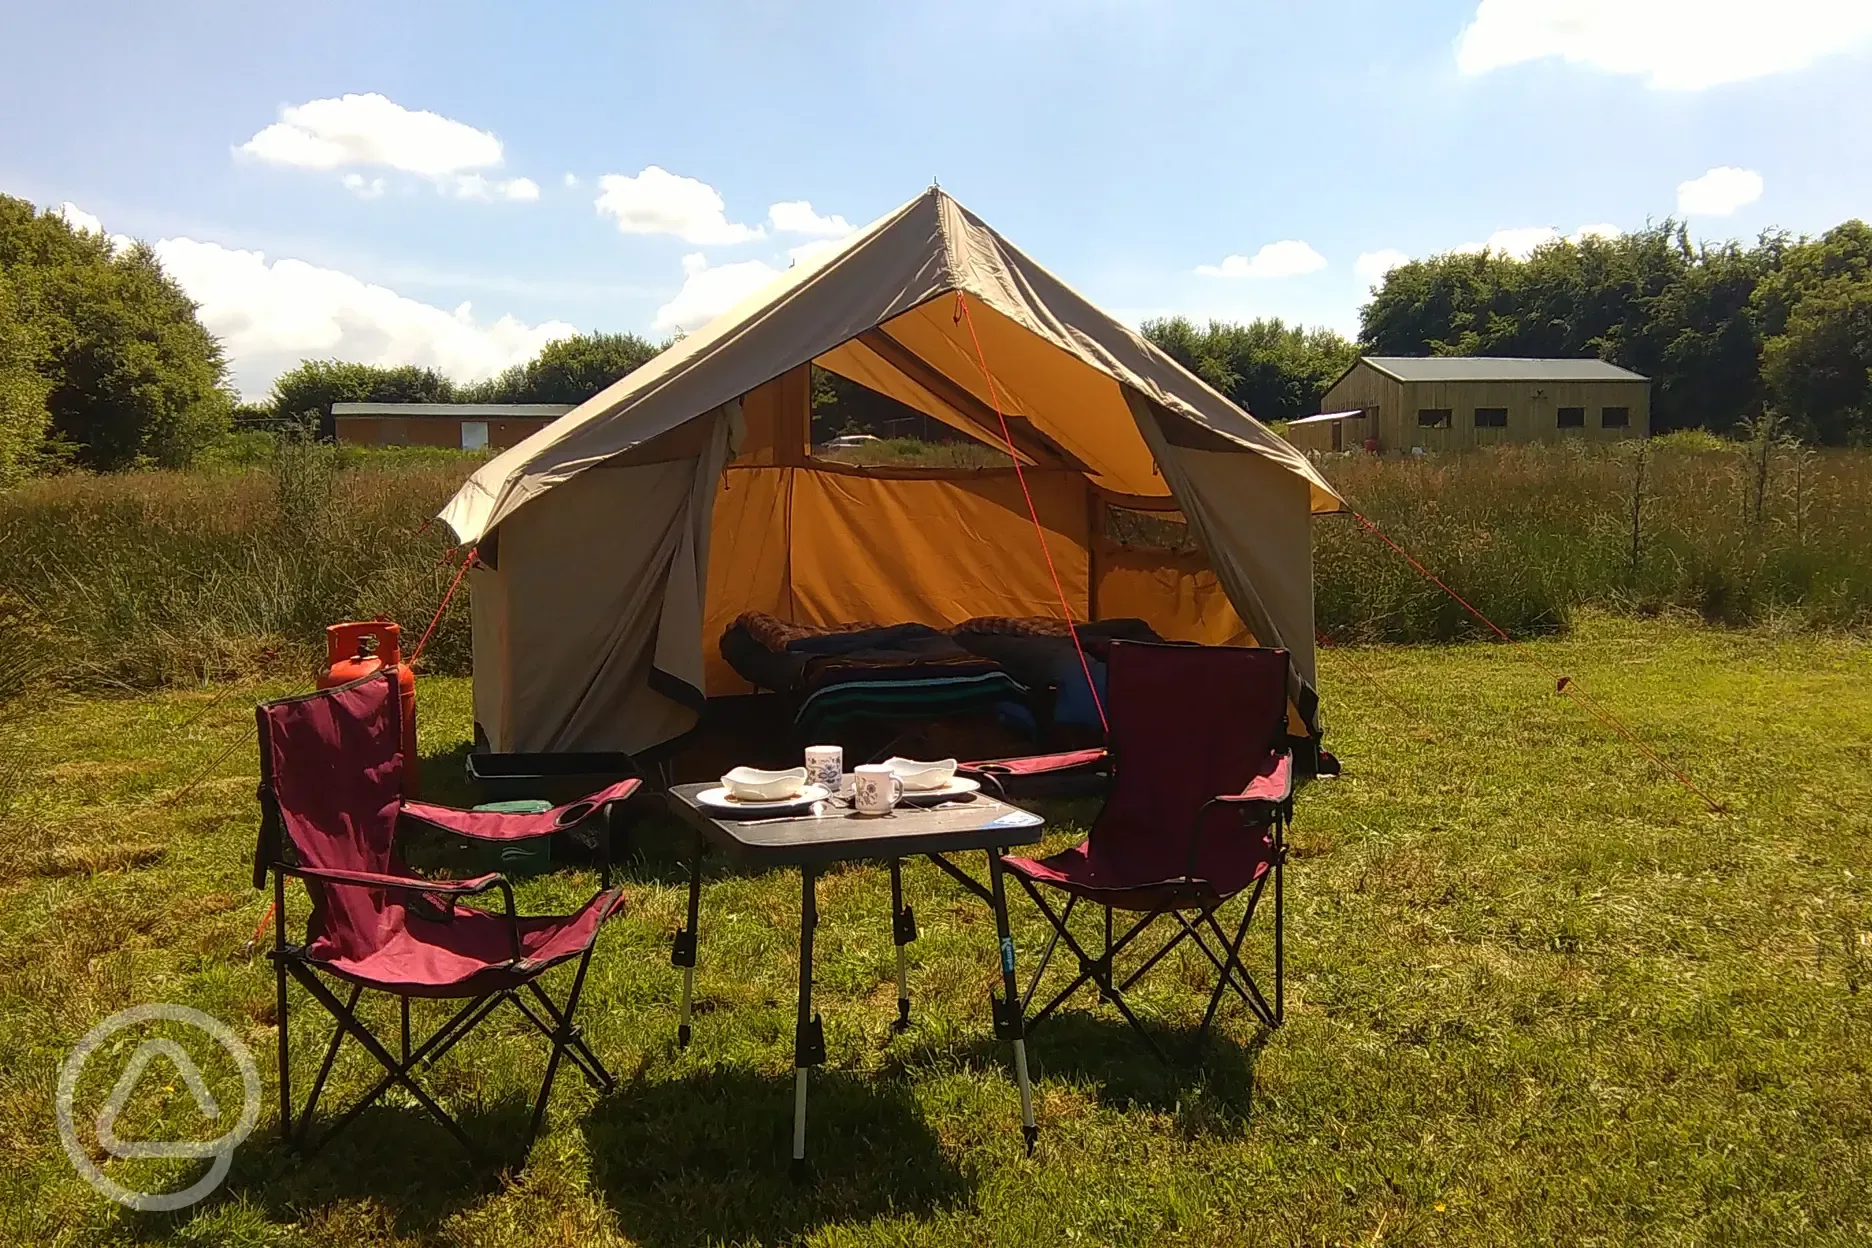 All tents are fully equipped Stonechat Meadow campsite